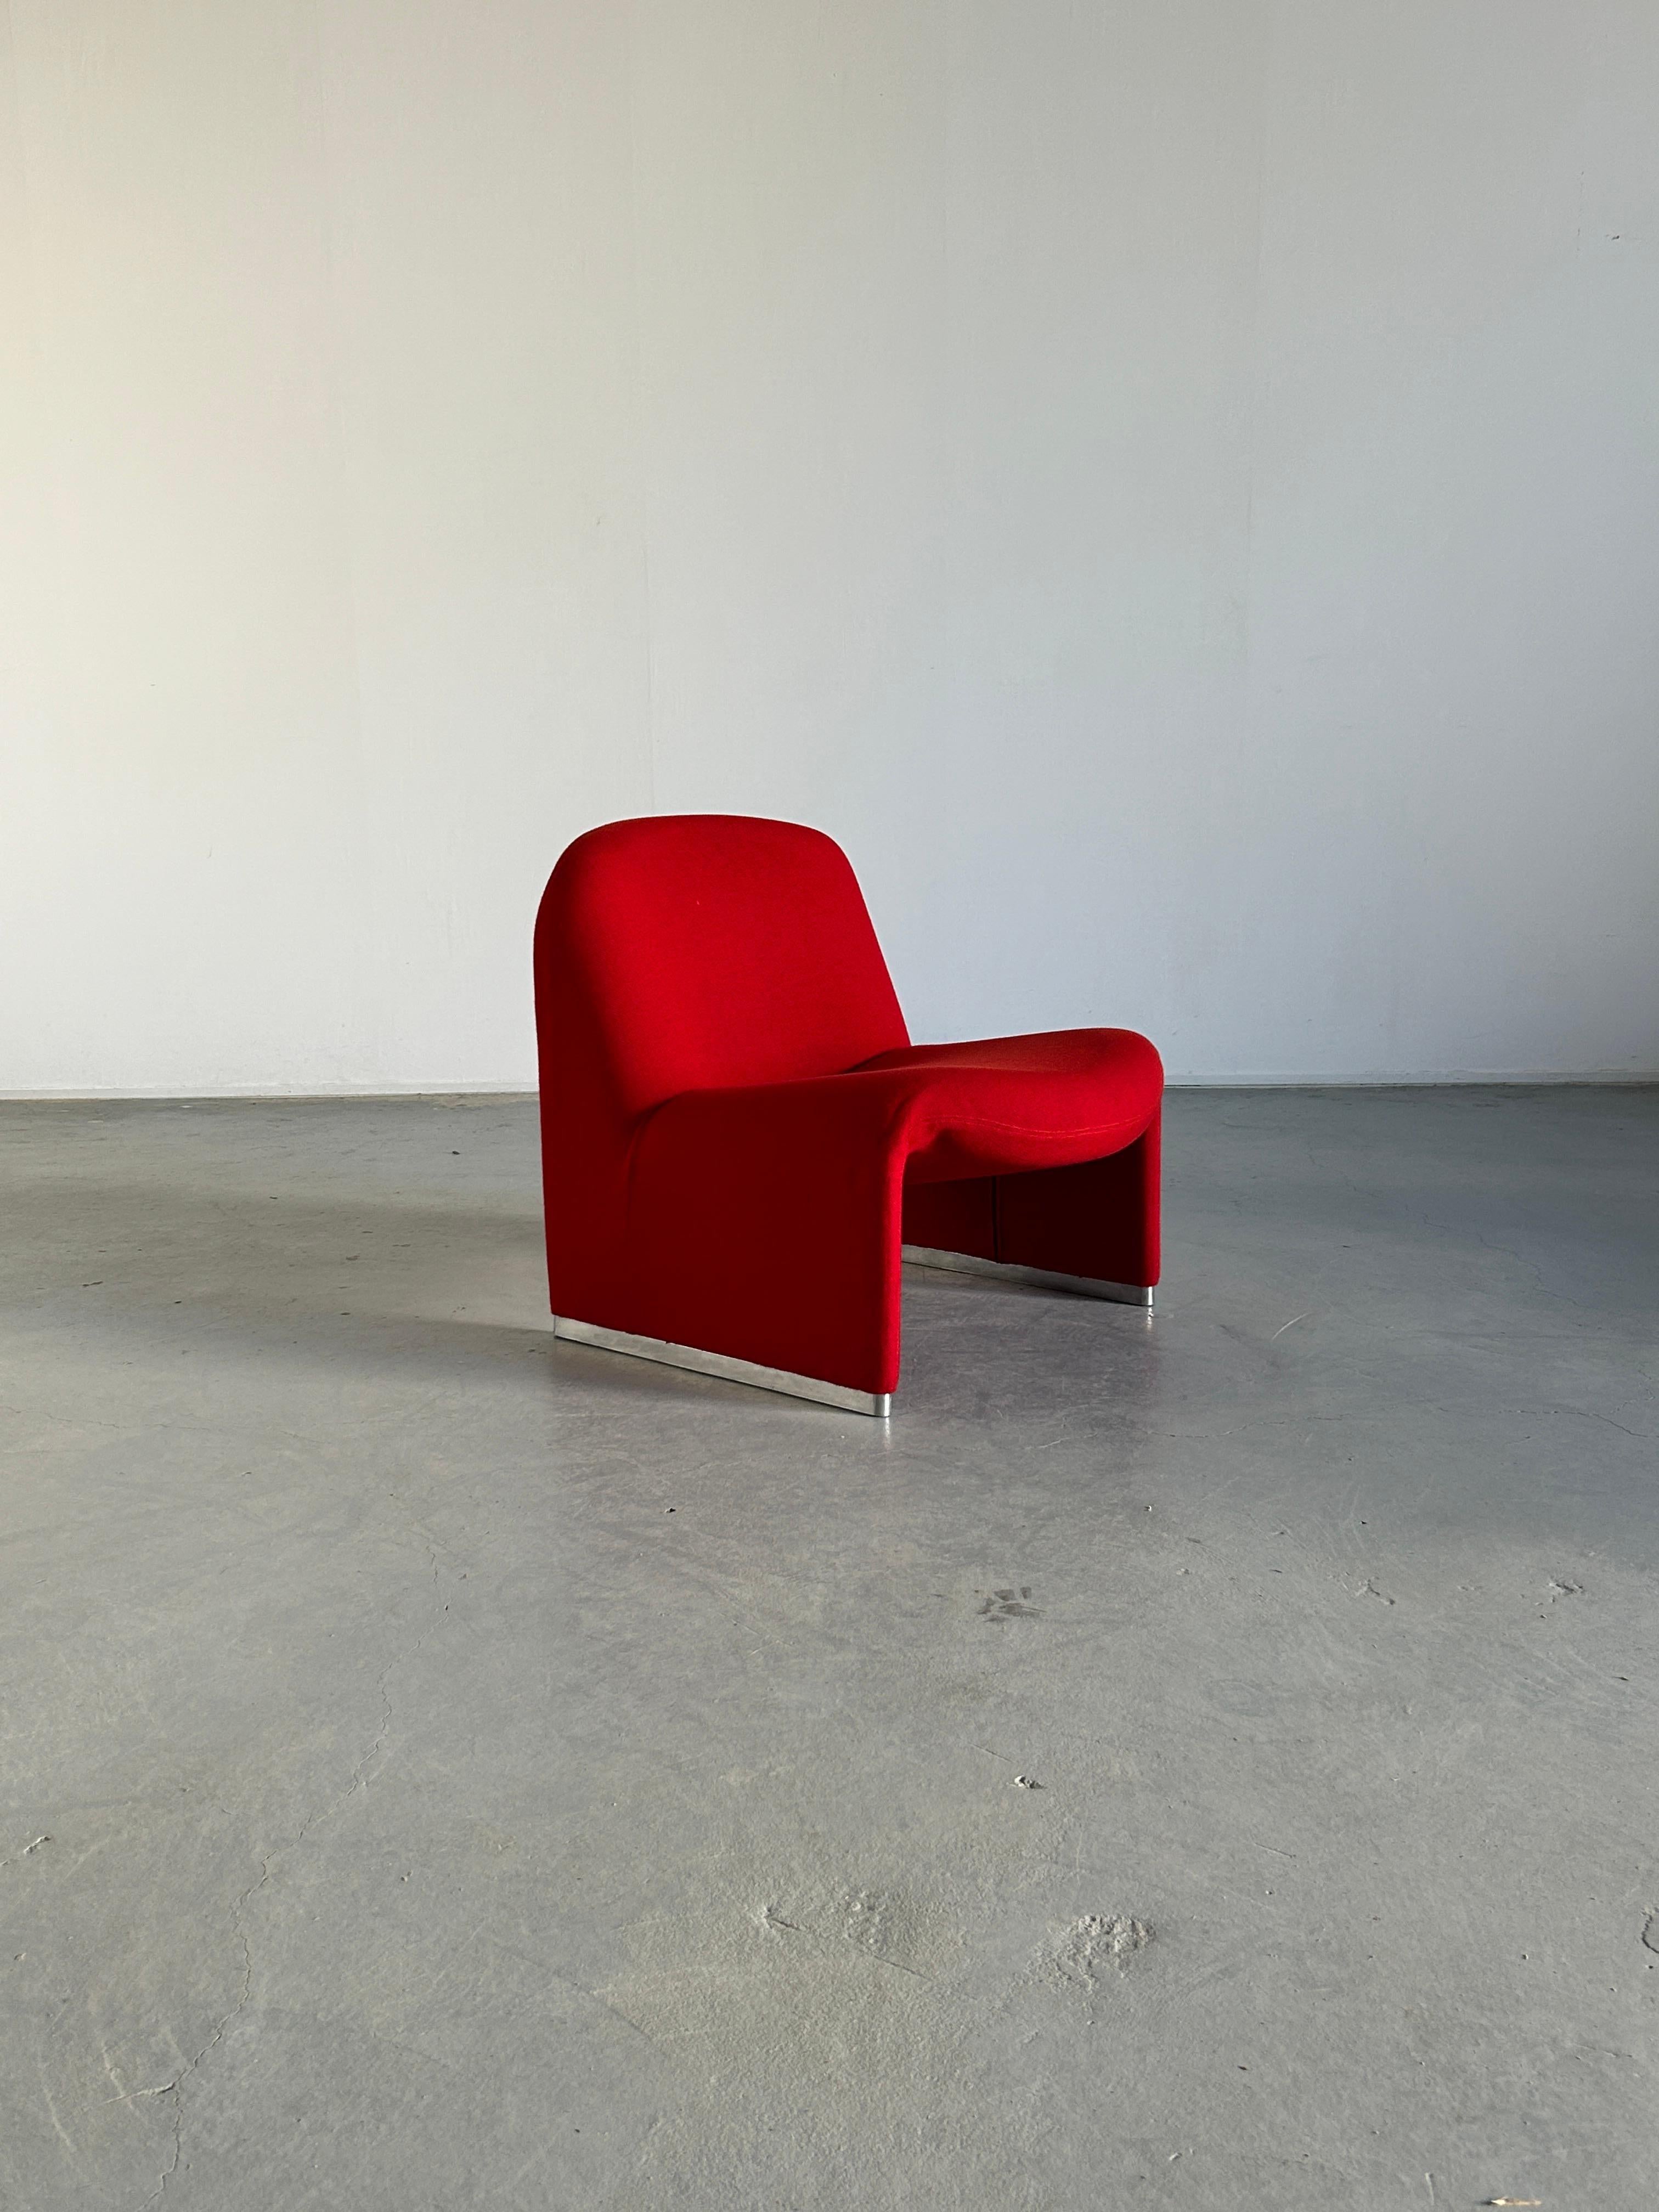 An original vintage iconic 'Alky' chair, designed by Giancarlo Piretti for Anonima Castelli. 
Produced in the early 1970s in Italy.

Iconic Italian design. 

Original vintage condition and original upholstery.
Very well preserved with smaller